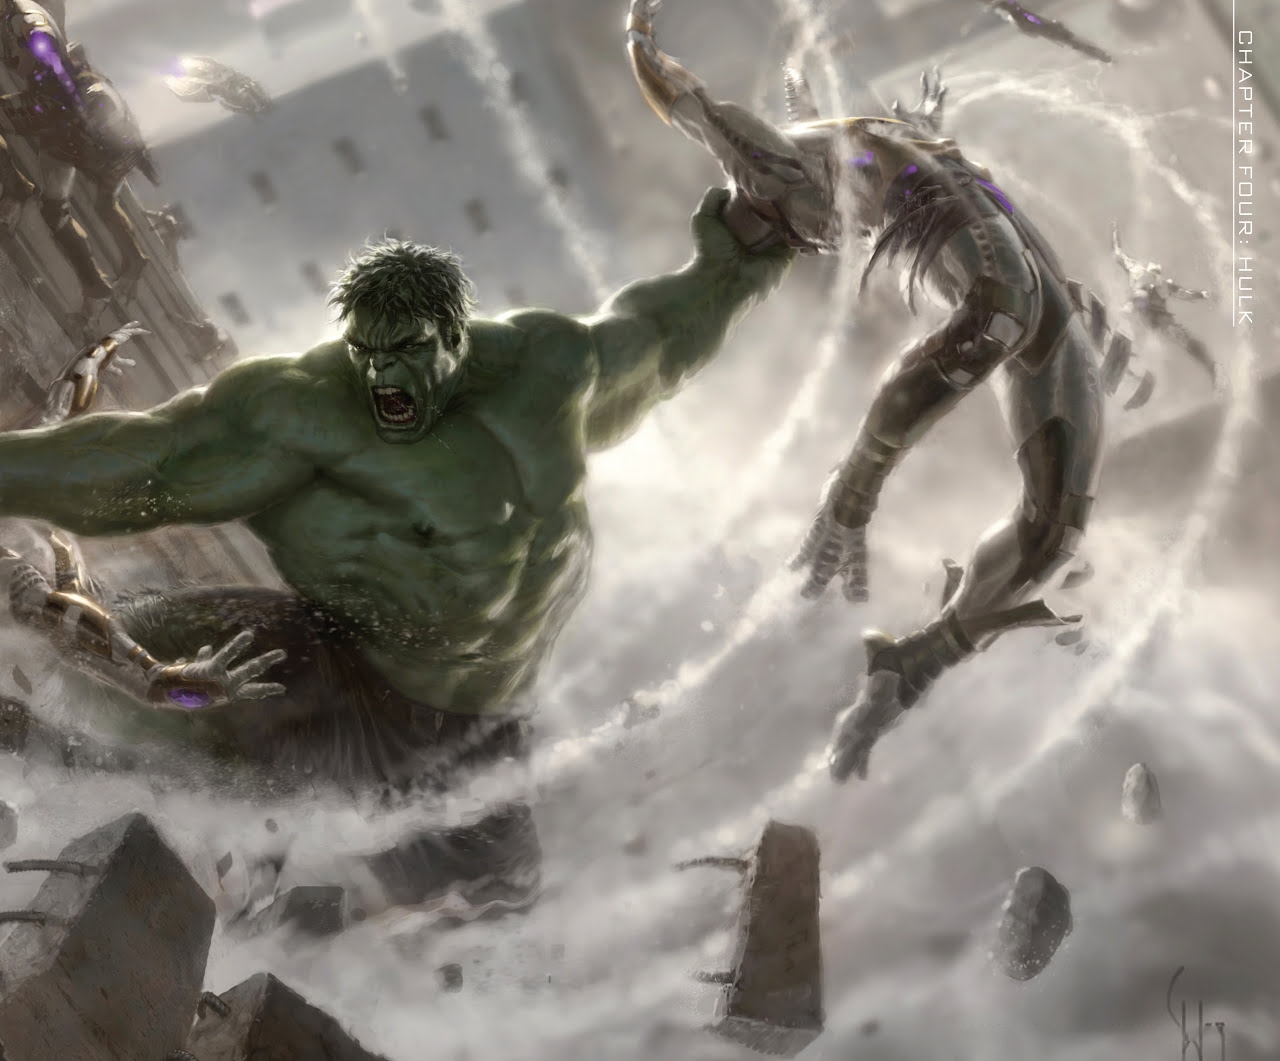 The Road to Marvel's Avengers Age of Ultron - The Art of the Marvel Cinematic Universe 151